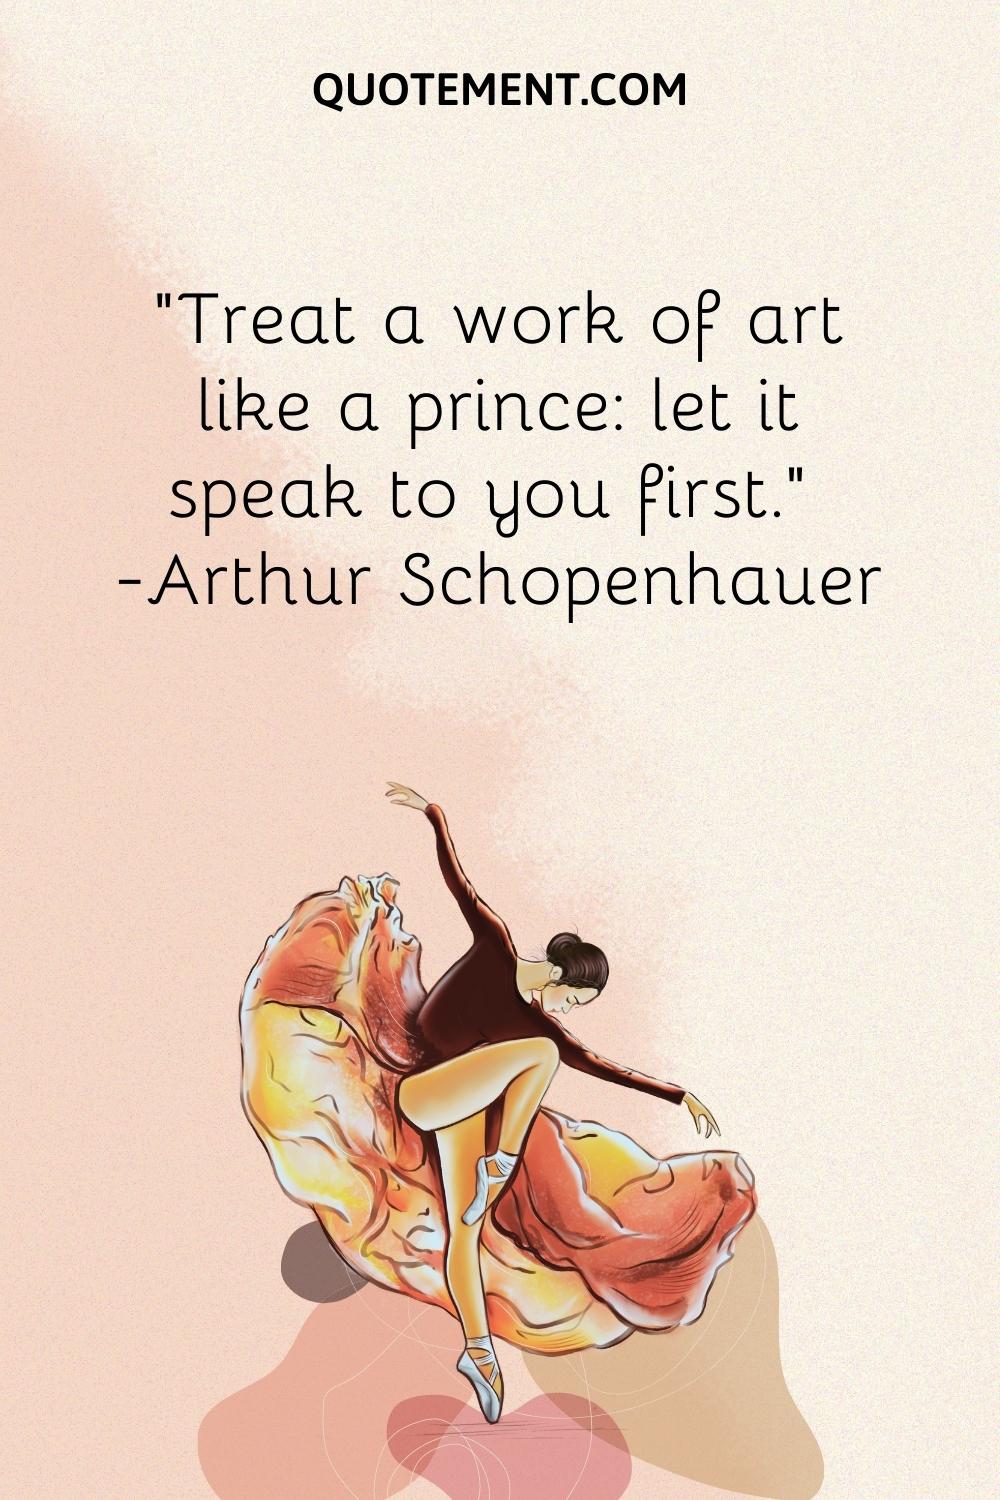 Treat a work of art like a prince let it speak to you first